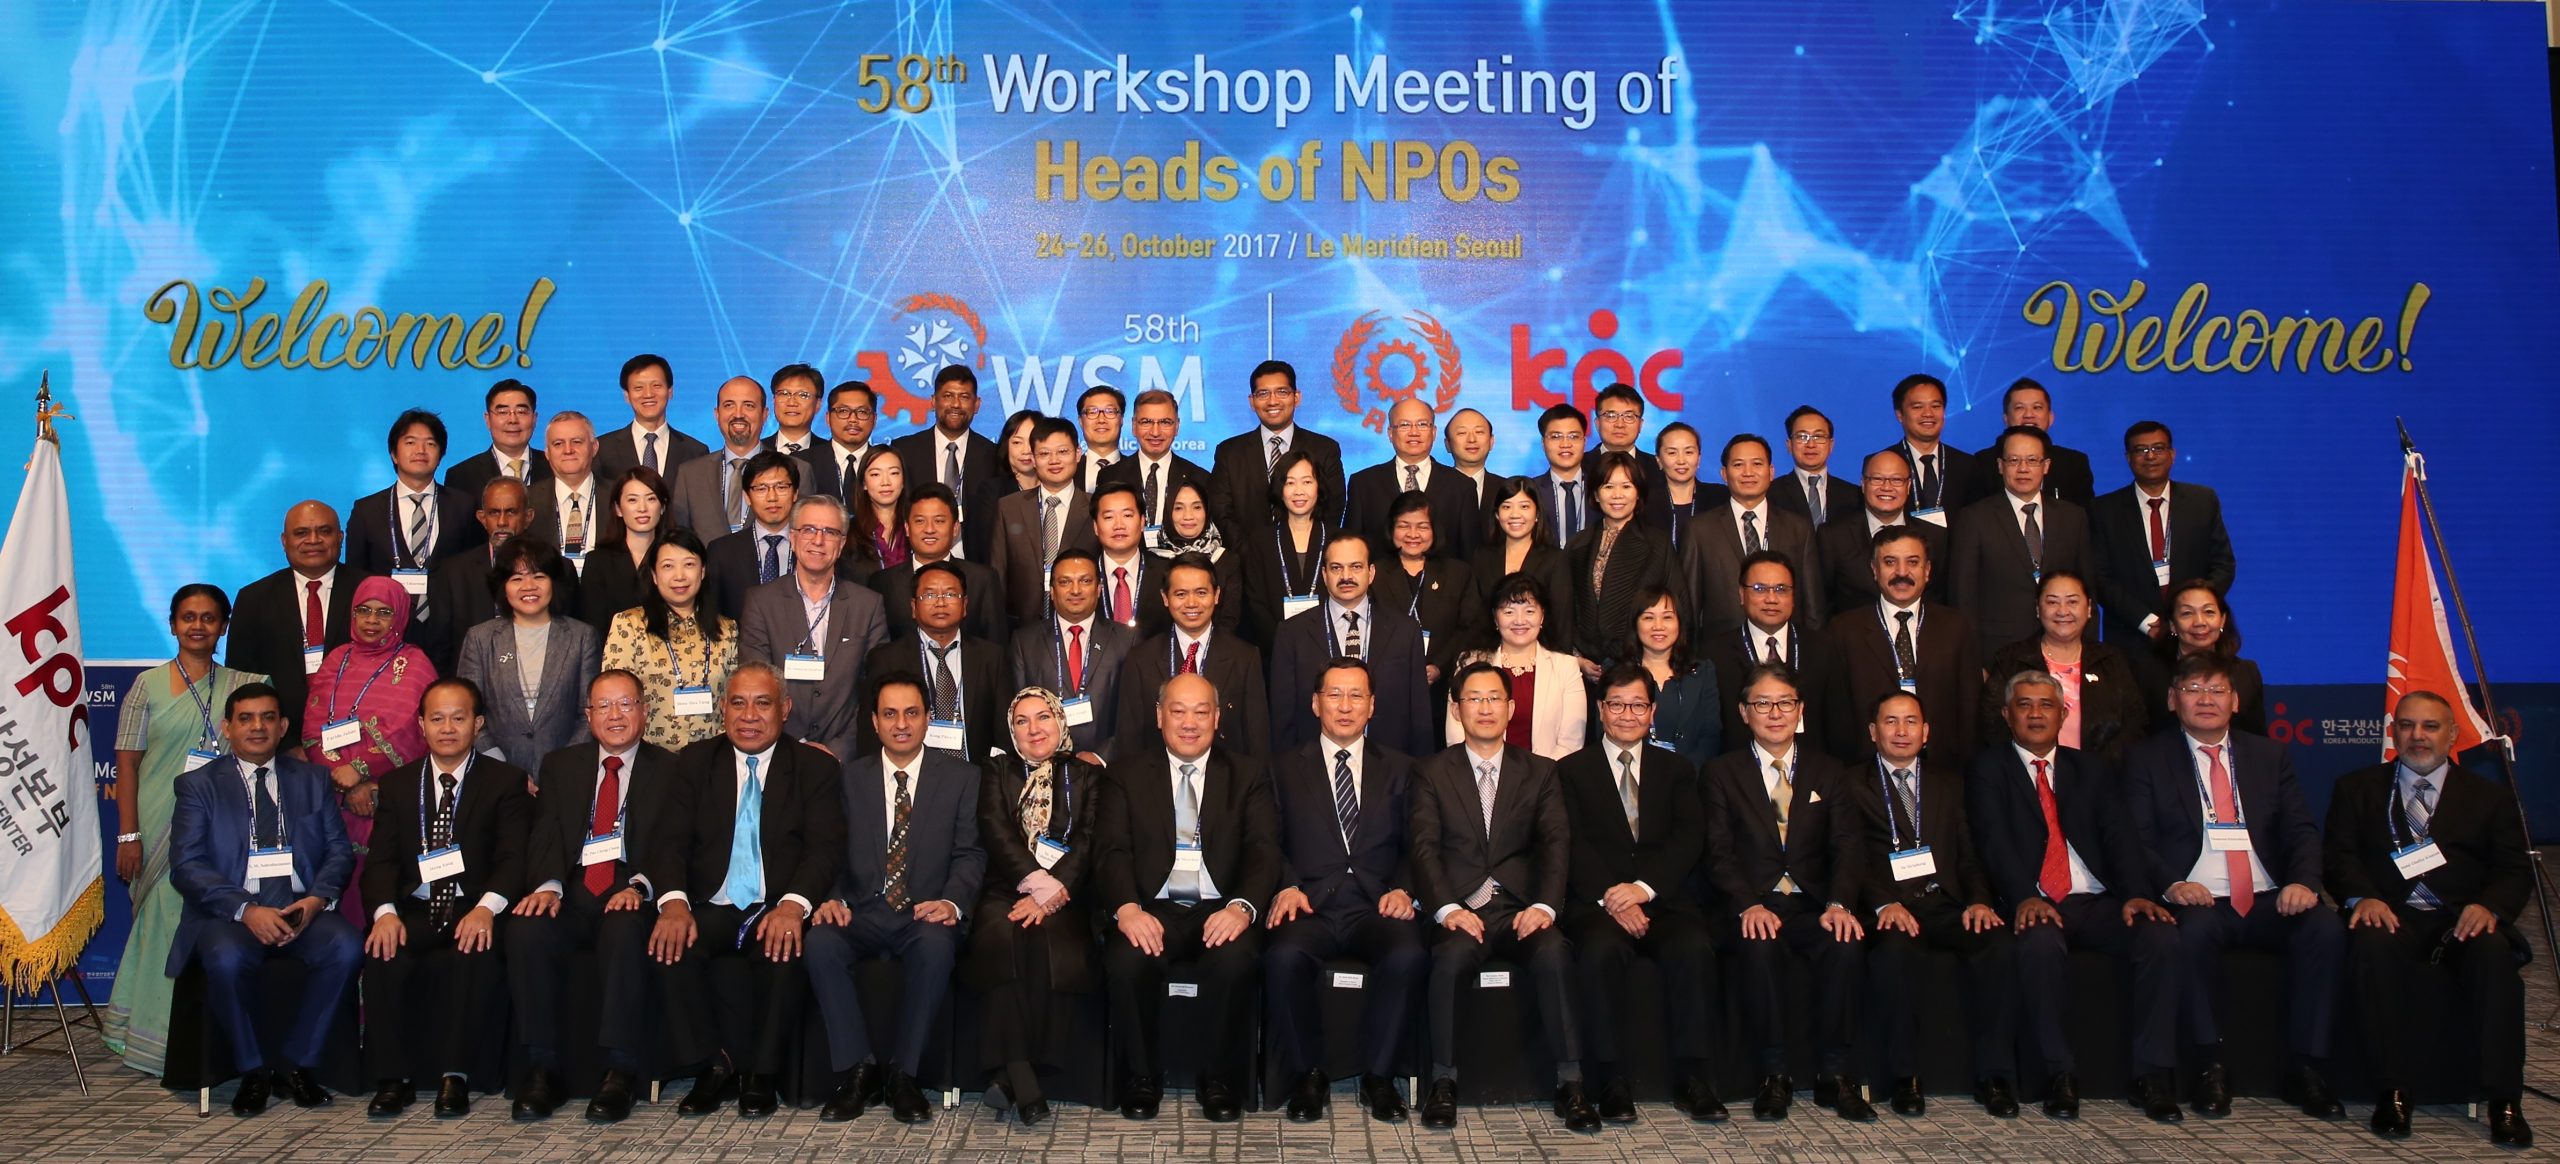 Delegates of the 58th Workshop Meeting of Heads of National Productivity Organizations.